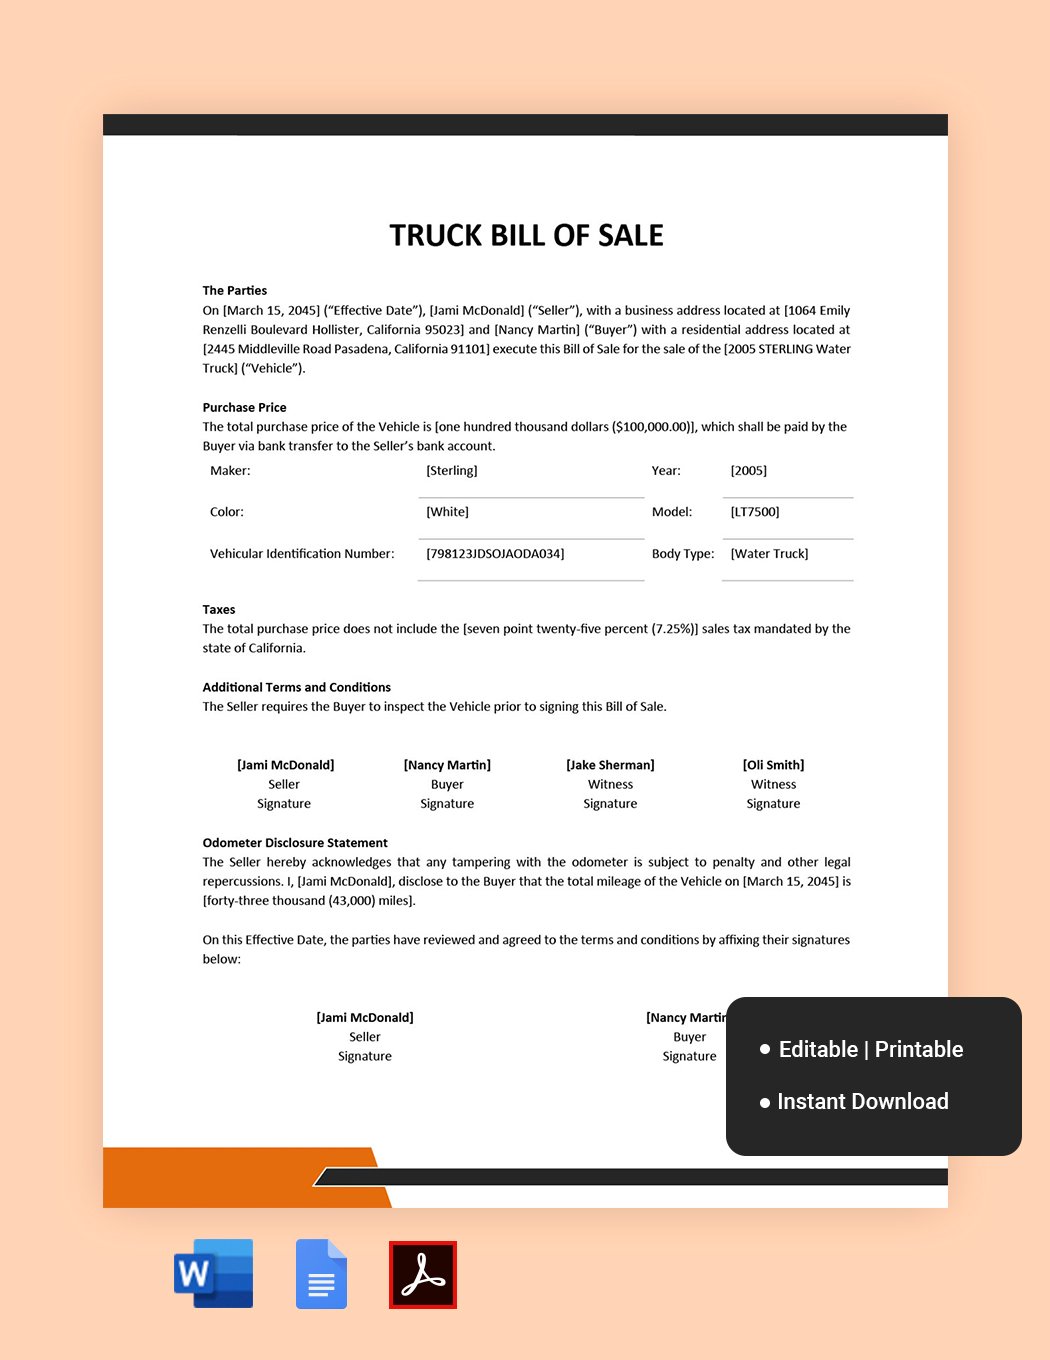 Truck Bill of Sale Template in Word, Google Docs, PDF, Apple Pages